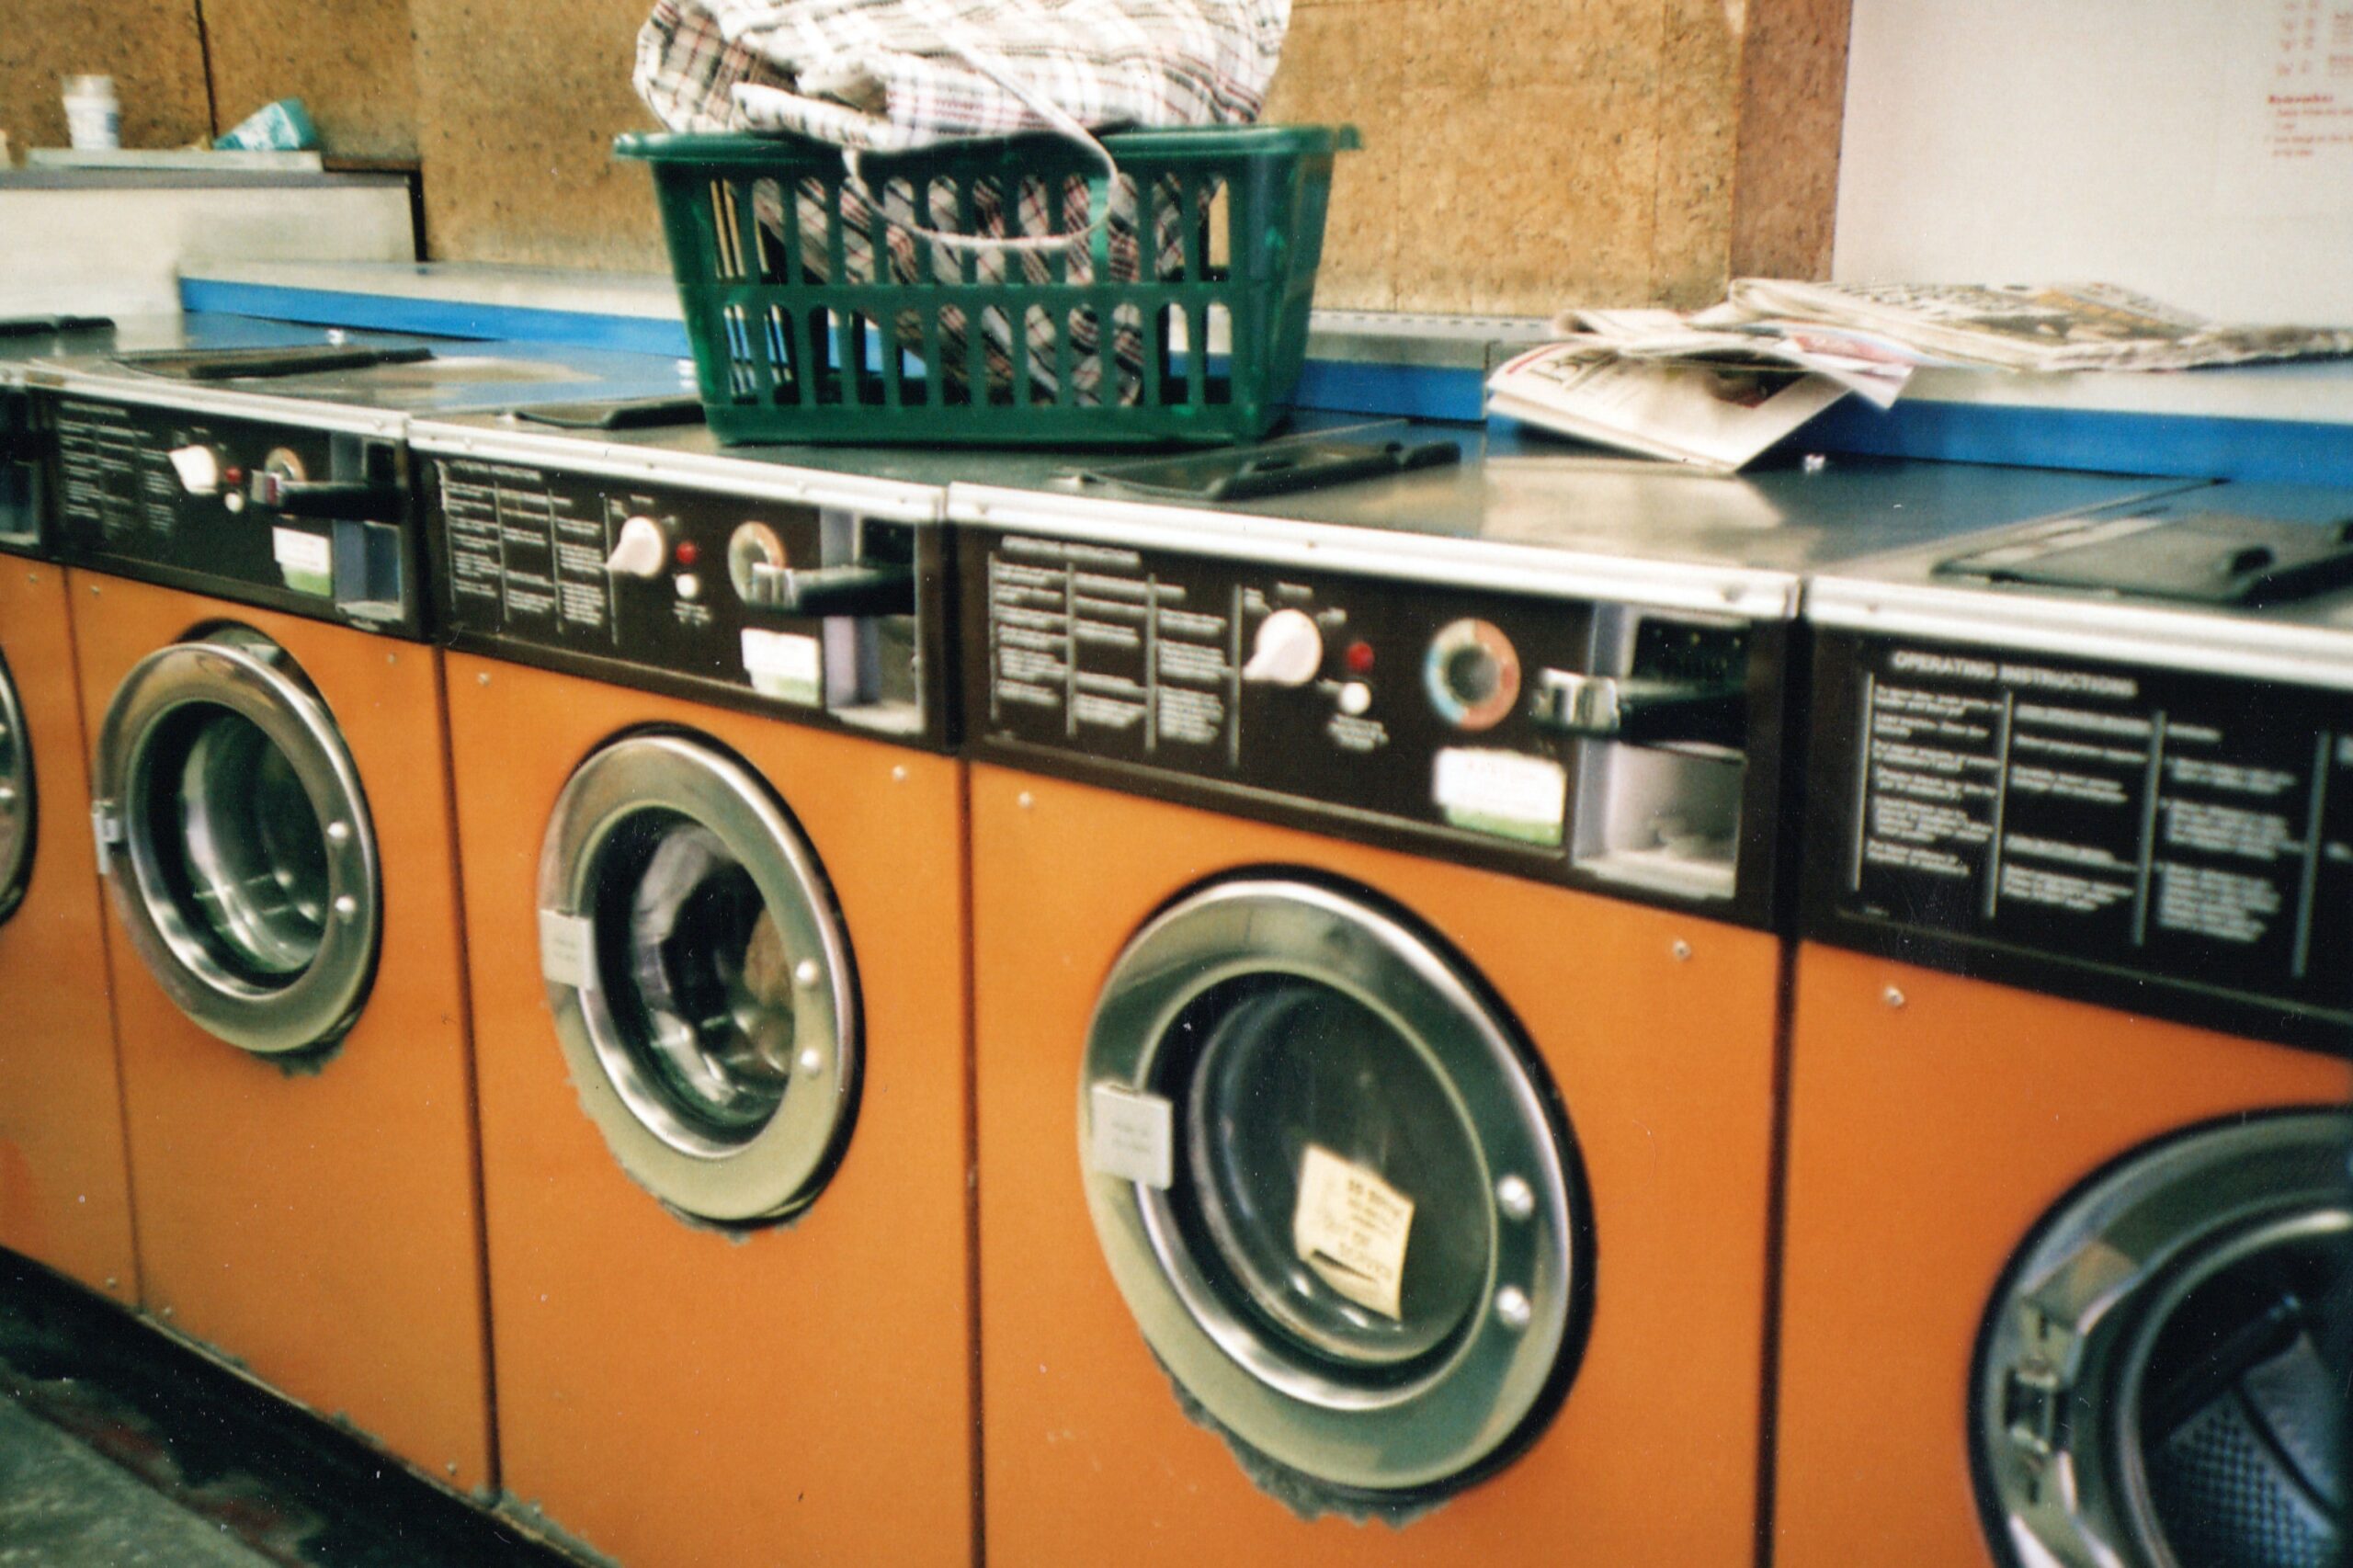 Understanding the Pricing Structure at Laundry Pal